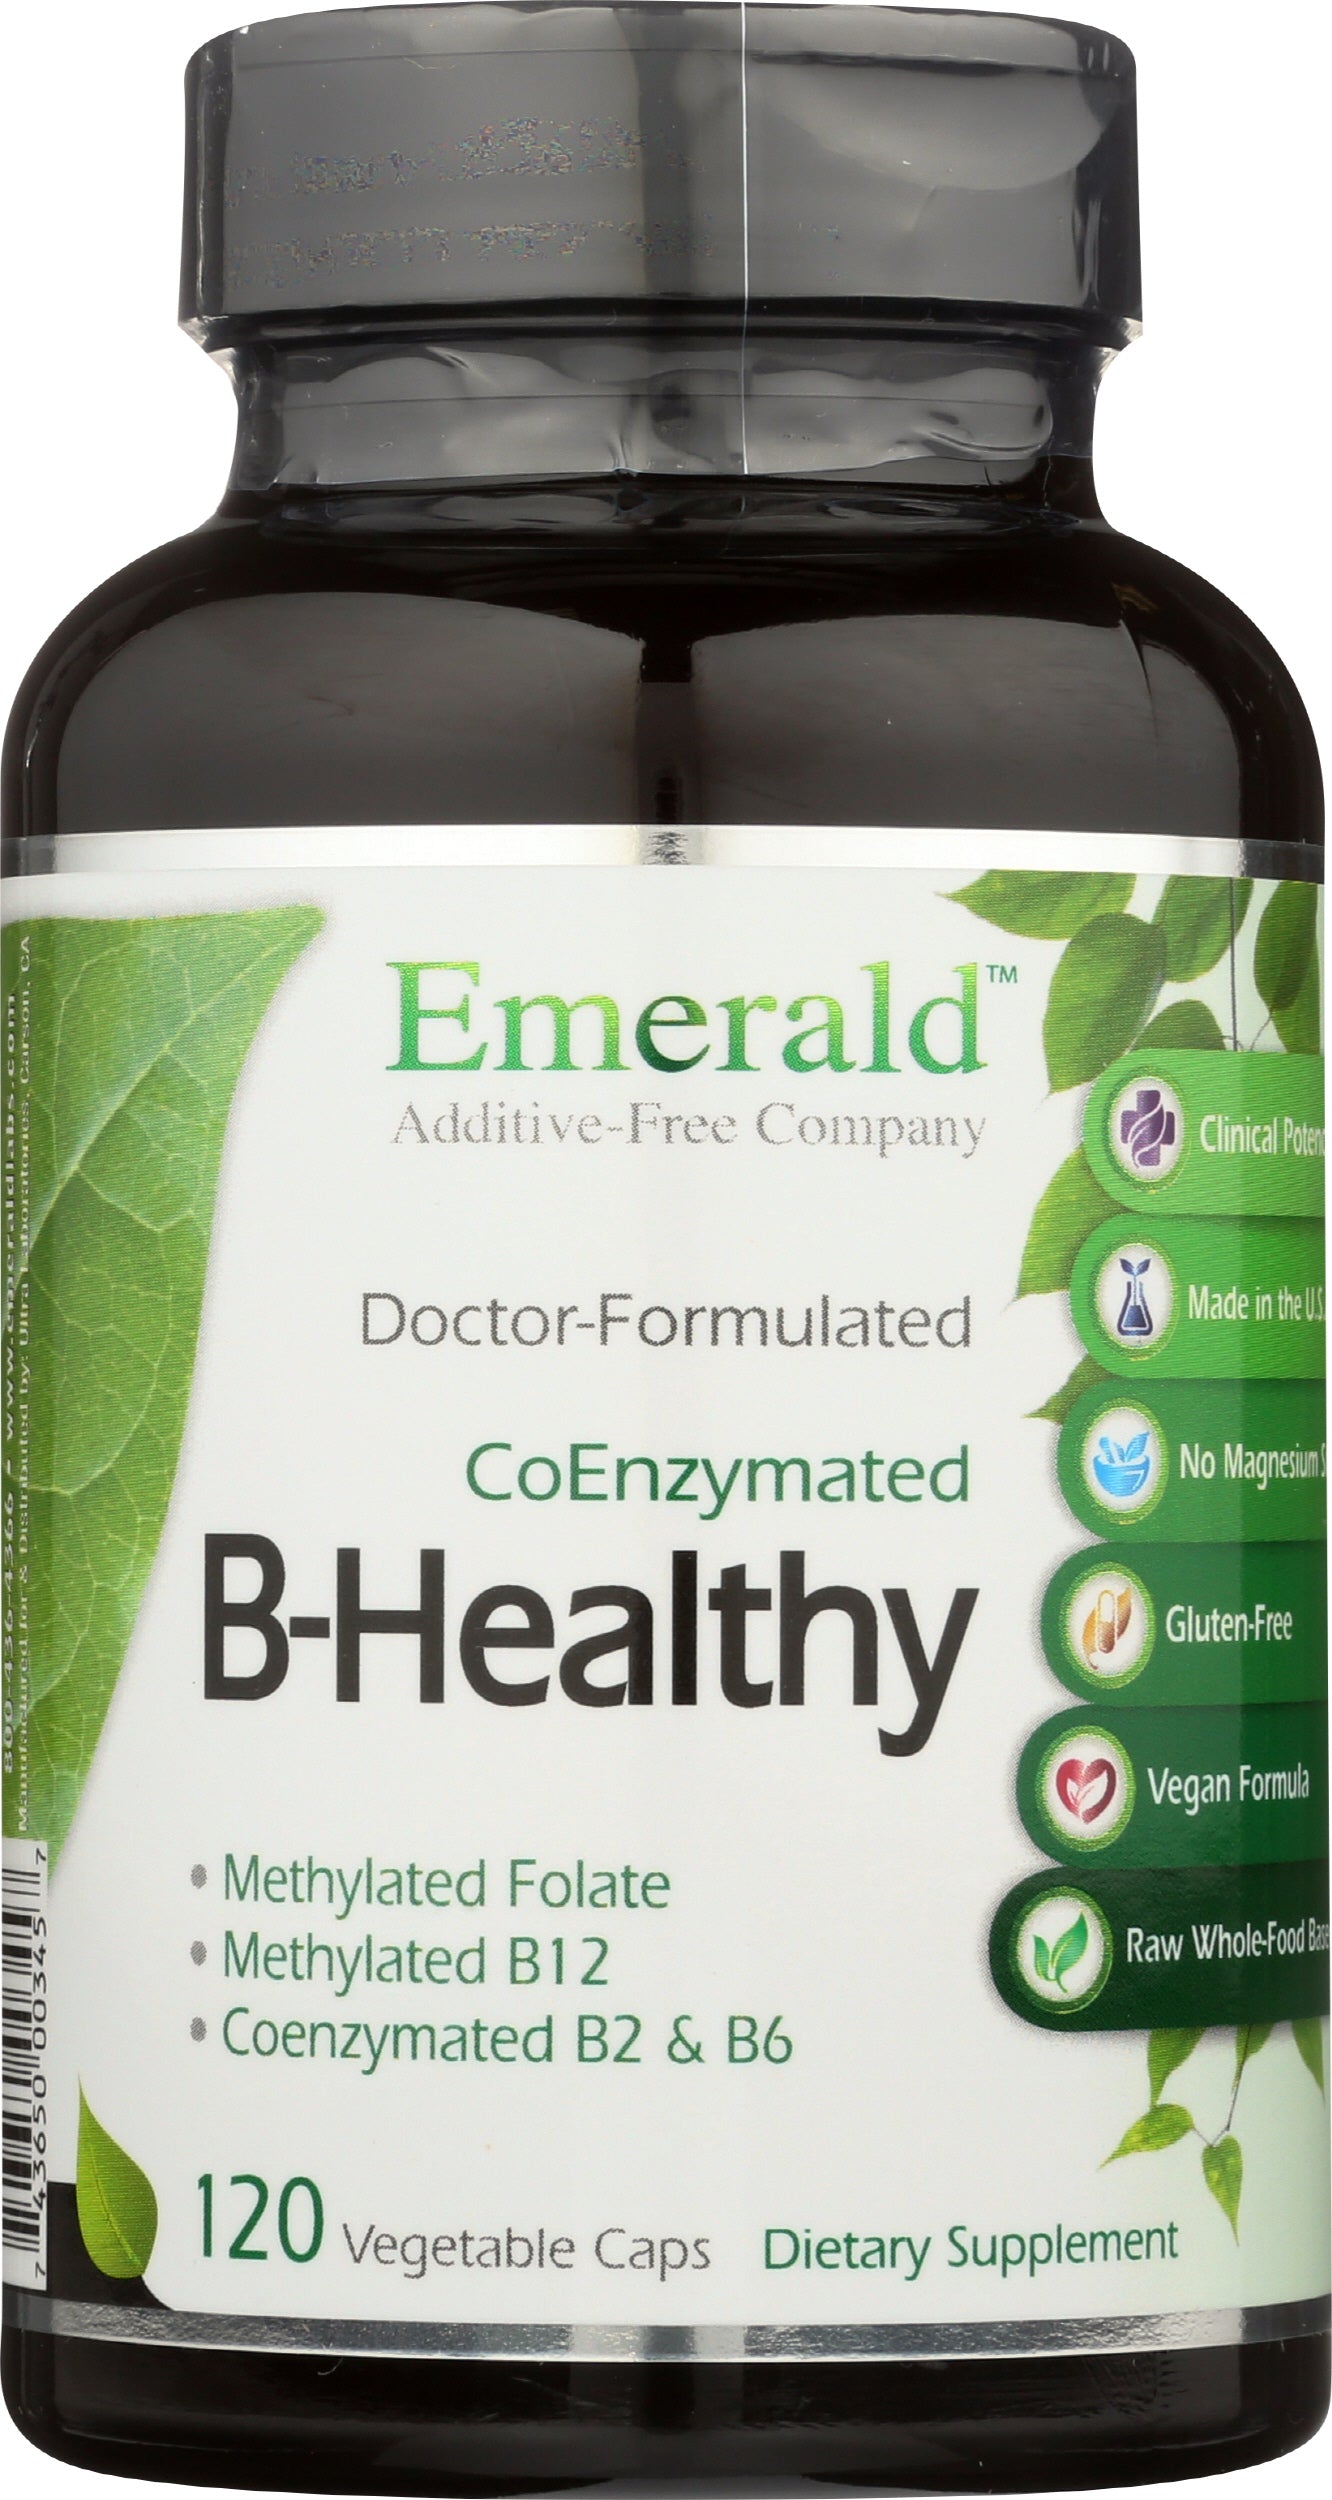 Emerald Labs Coenzymated B-Healthy 120 Vegetable Caps Front